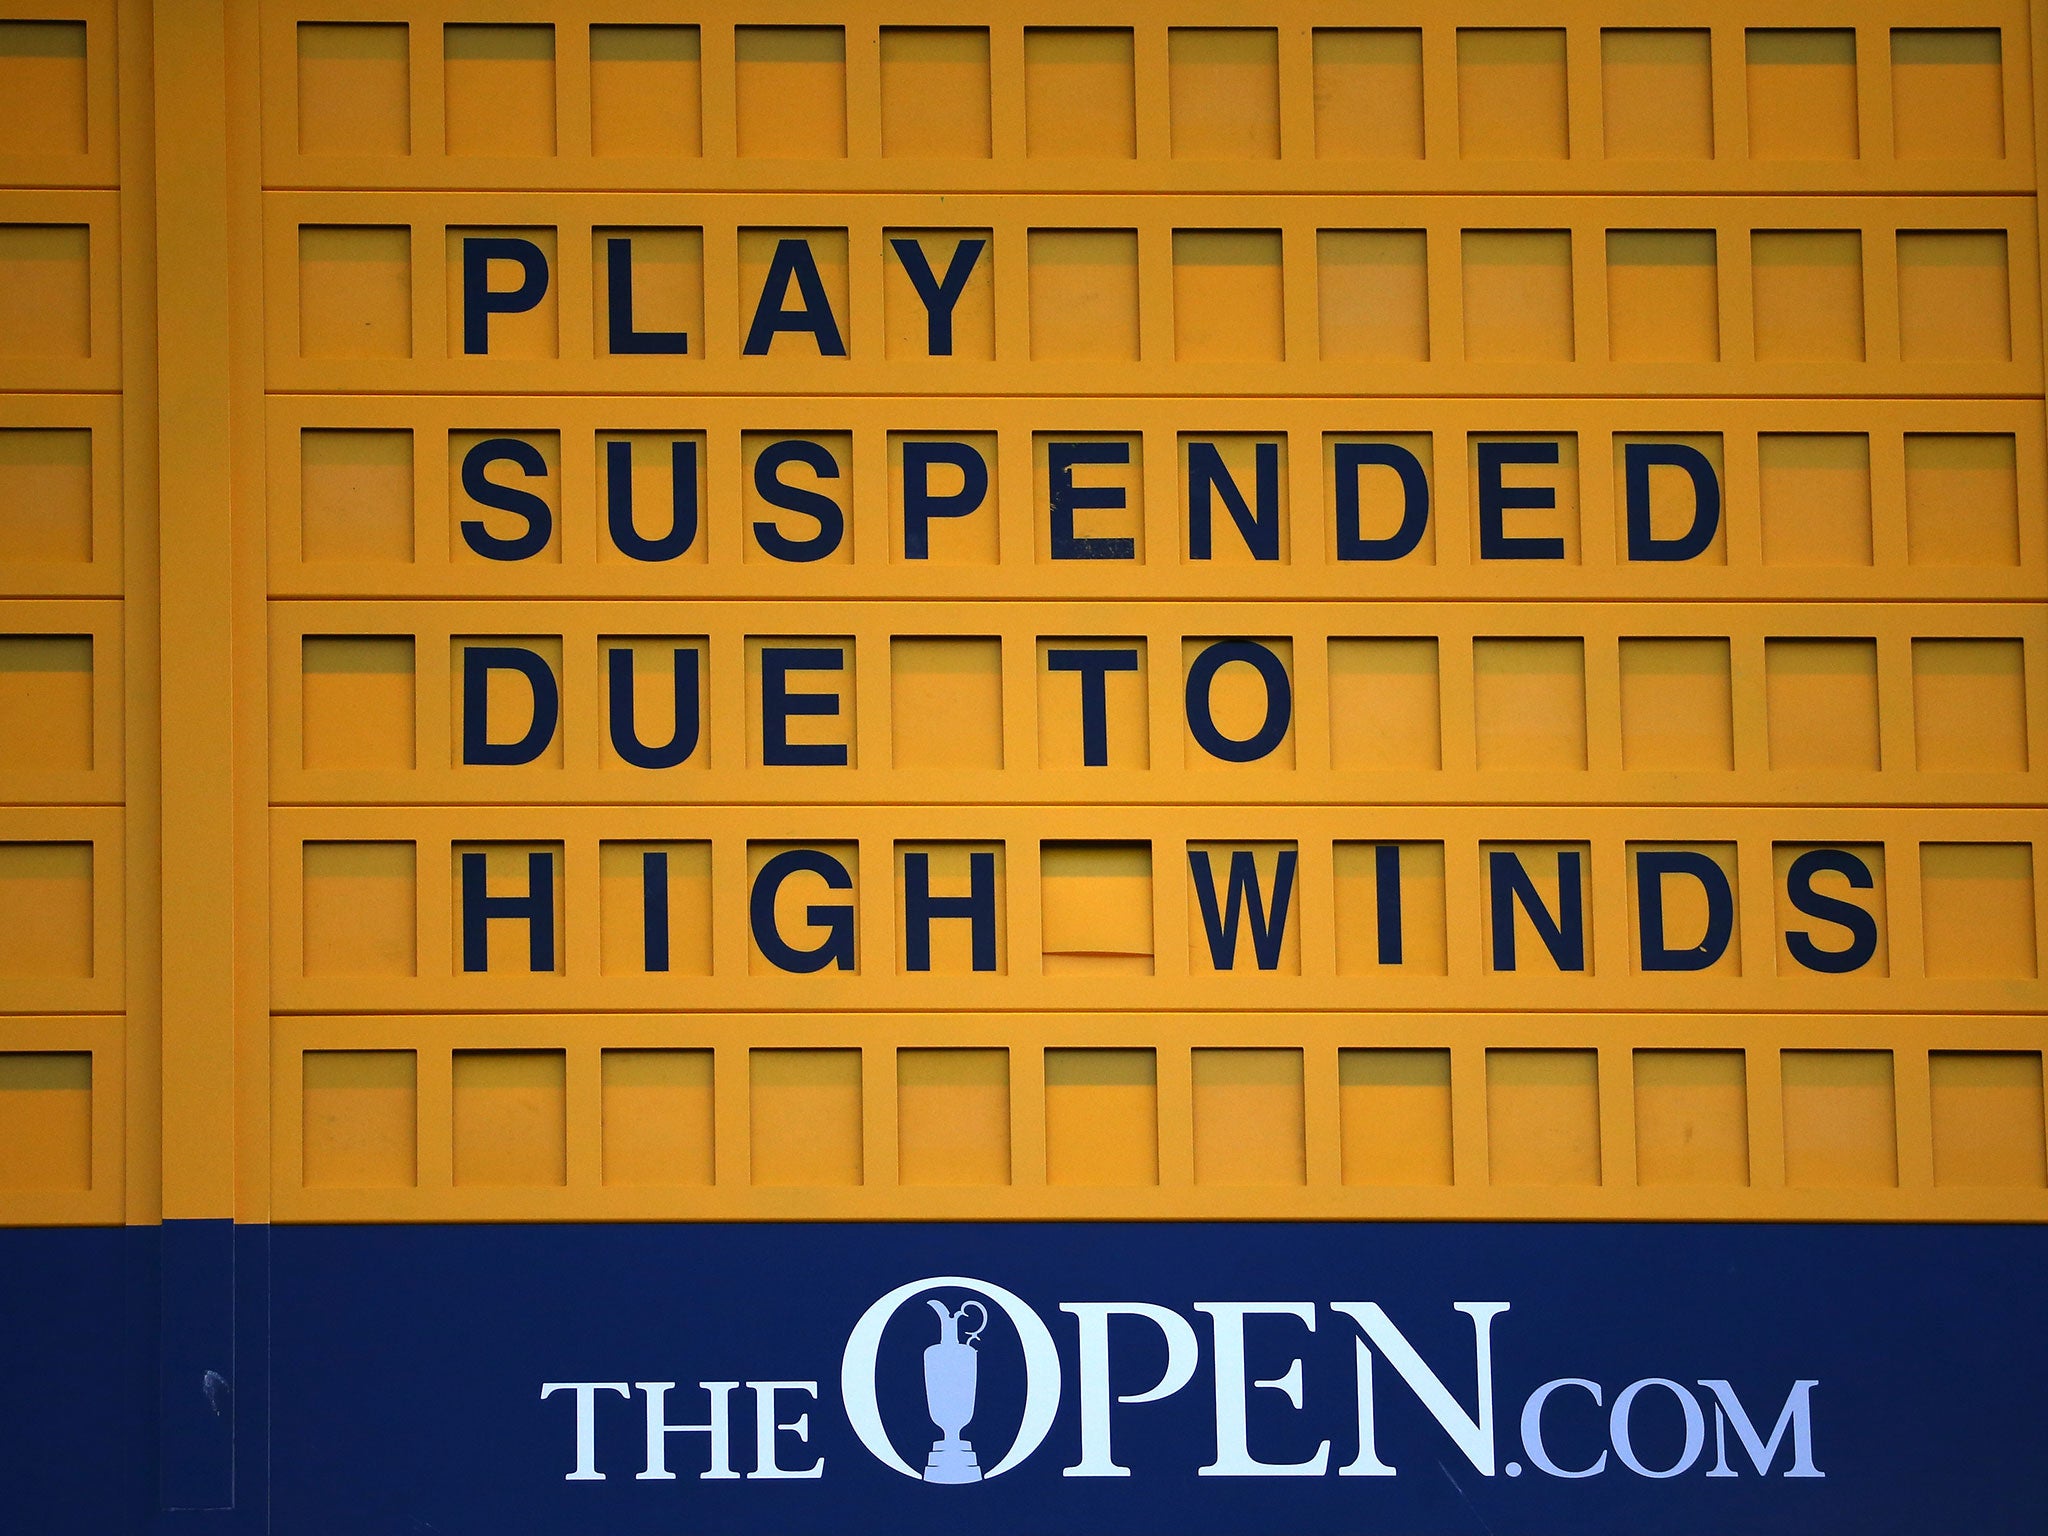 Play is suspended on day three at The Open